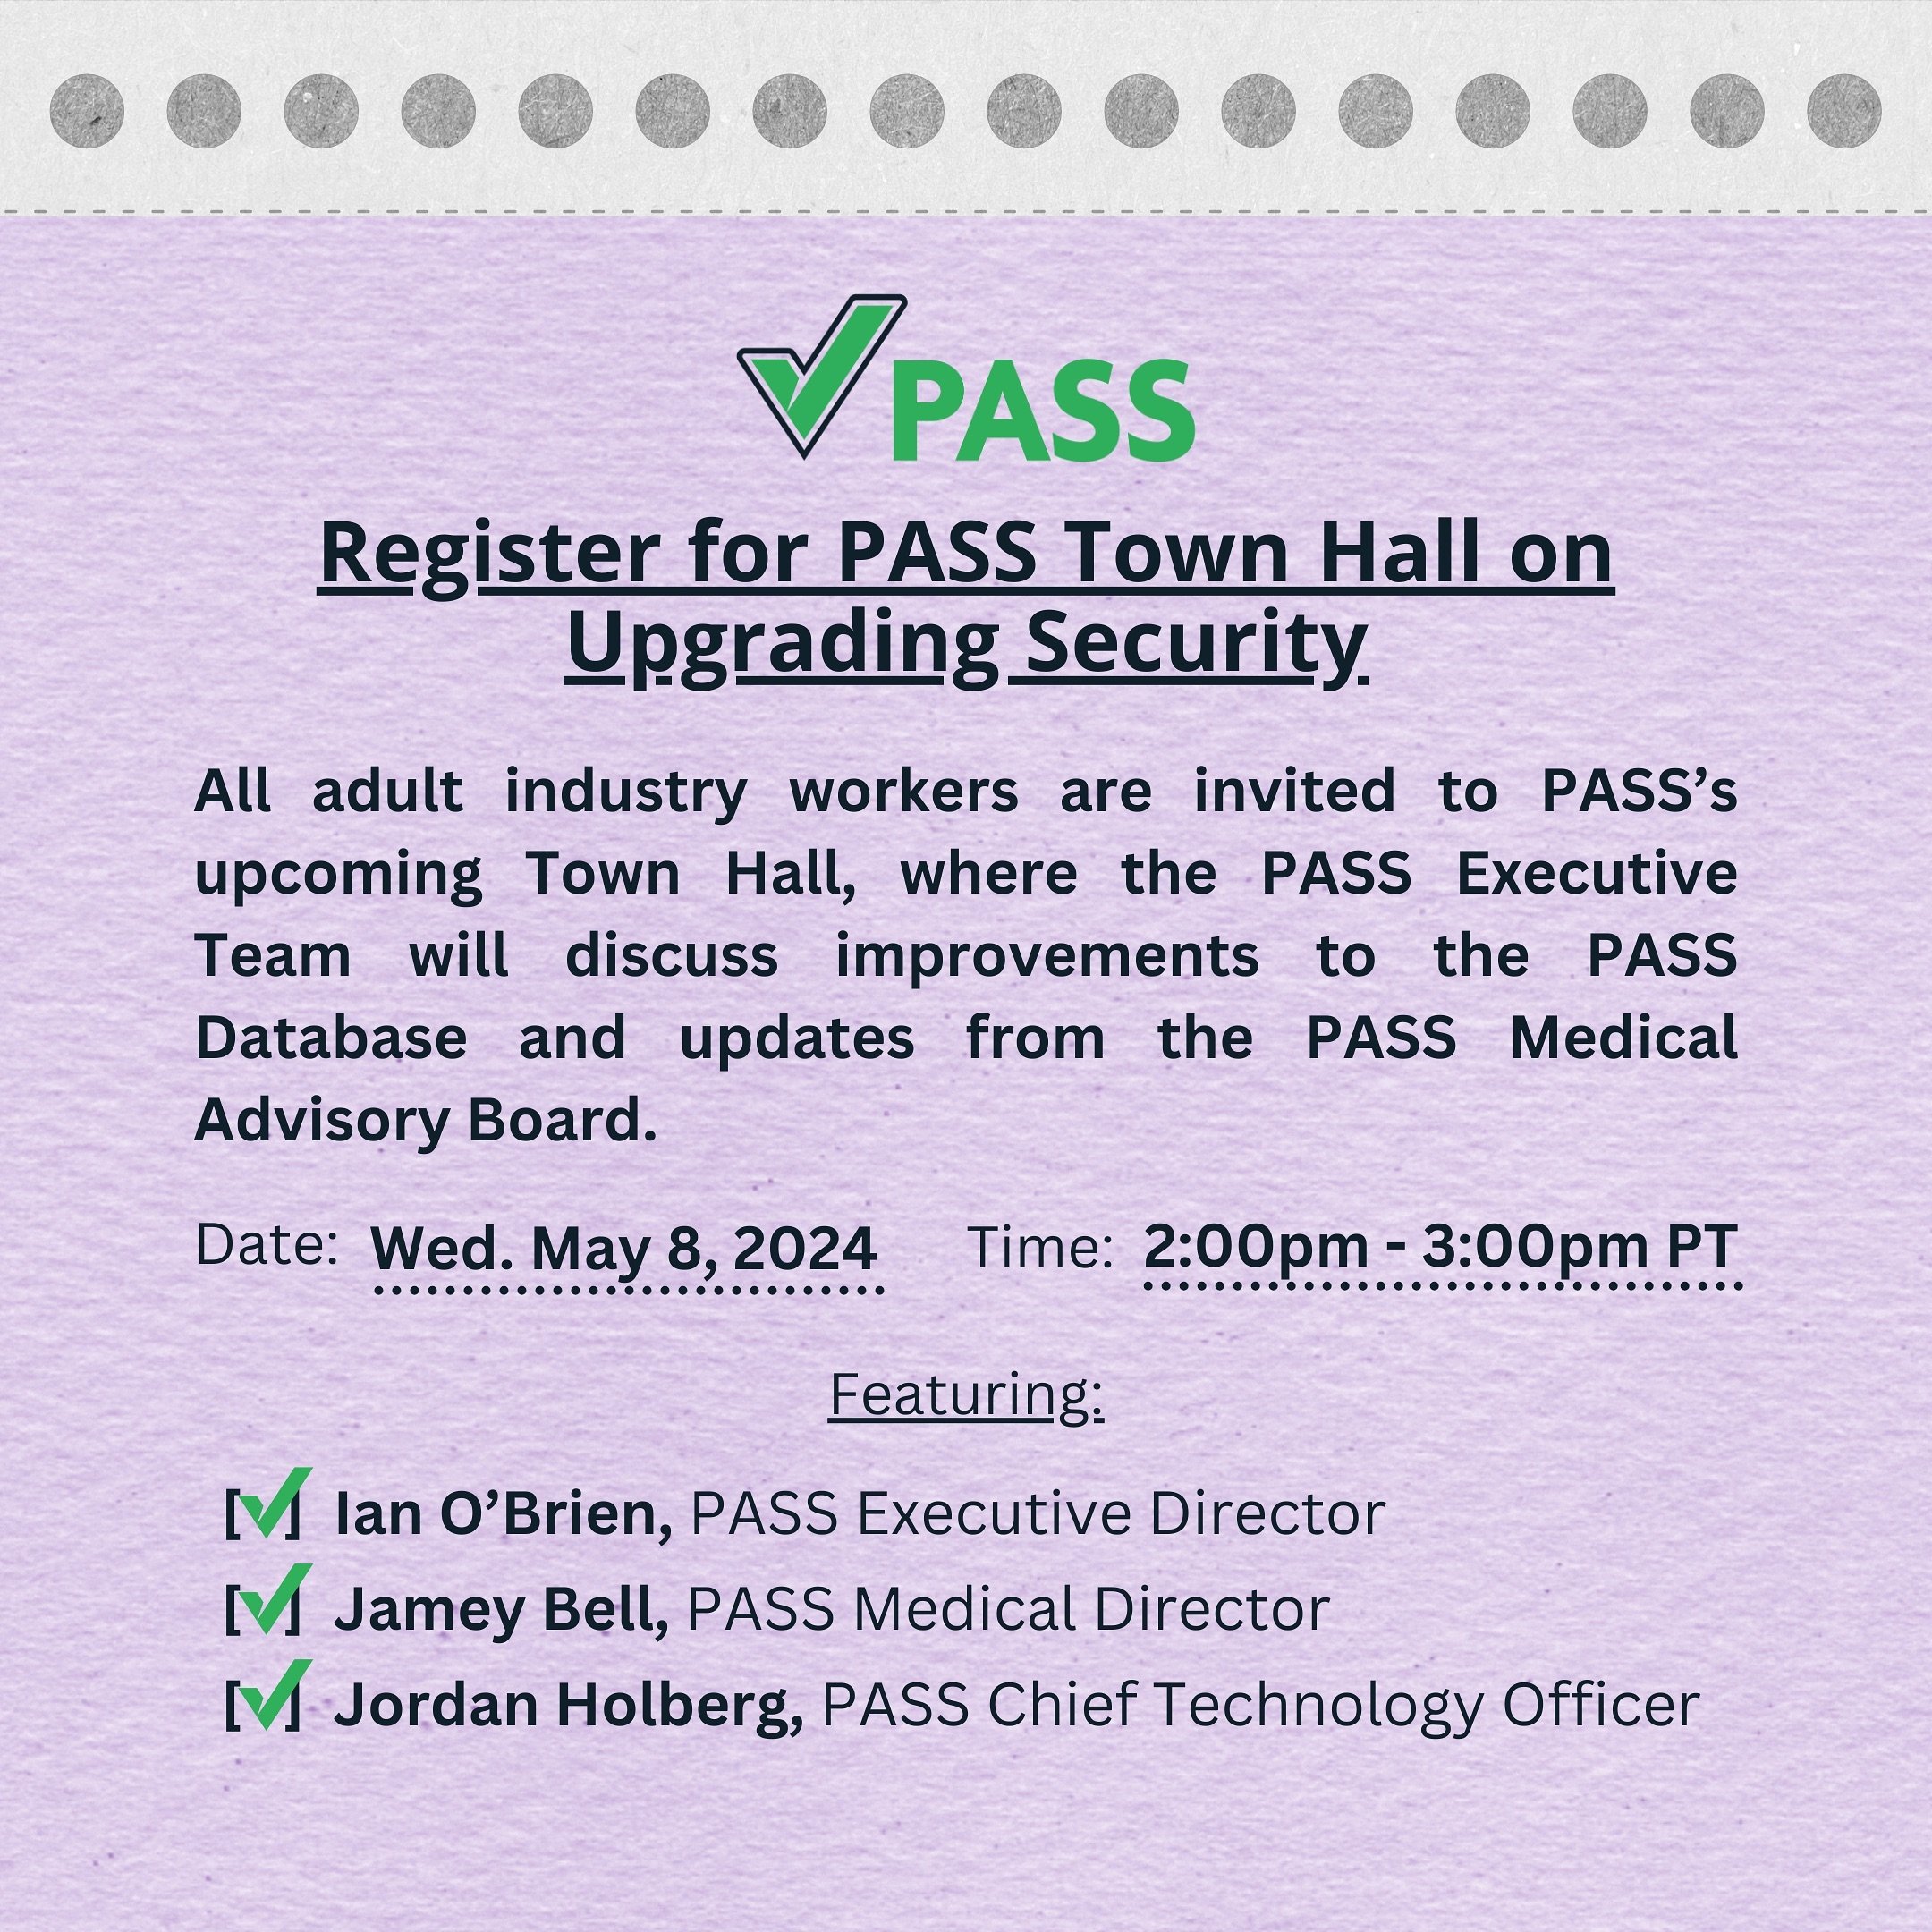 On Wednesday, May 8, we will be hosting a Town Hall via Zoom, to go over improvements to the PASS Database + the latest updates from the PASS Medical Advisory Board.

Register today &amp; mark your calendars! 🗓️

Register: https://zoom.us/webinar/re